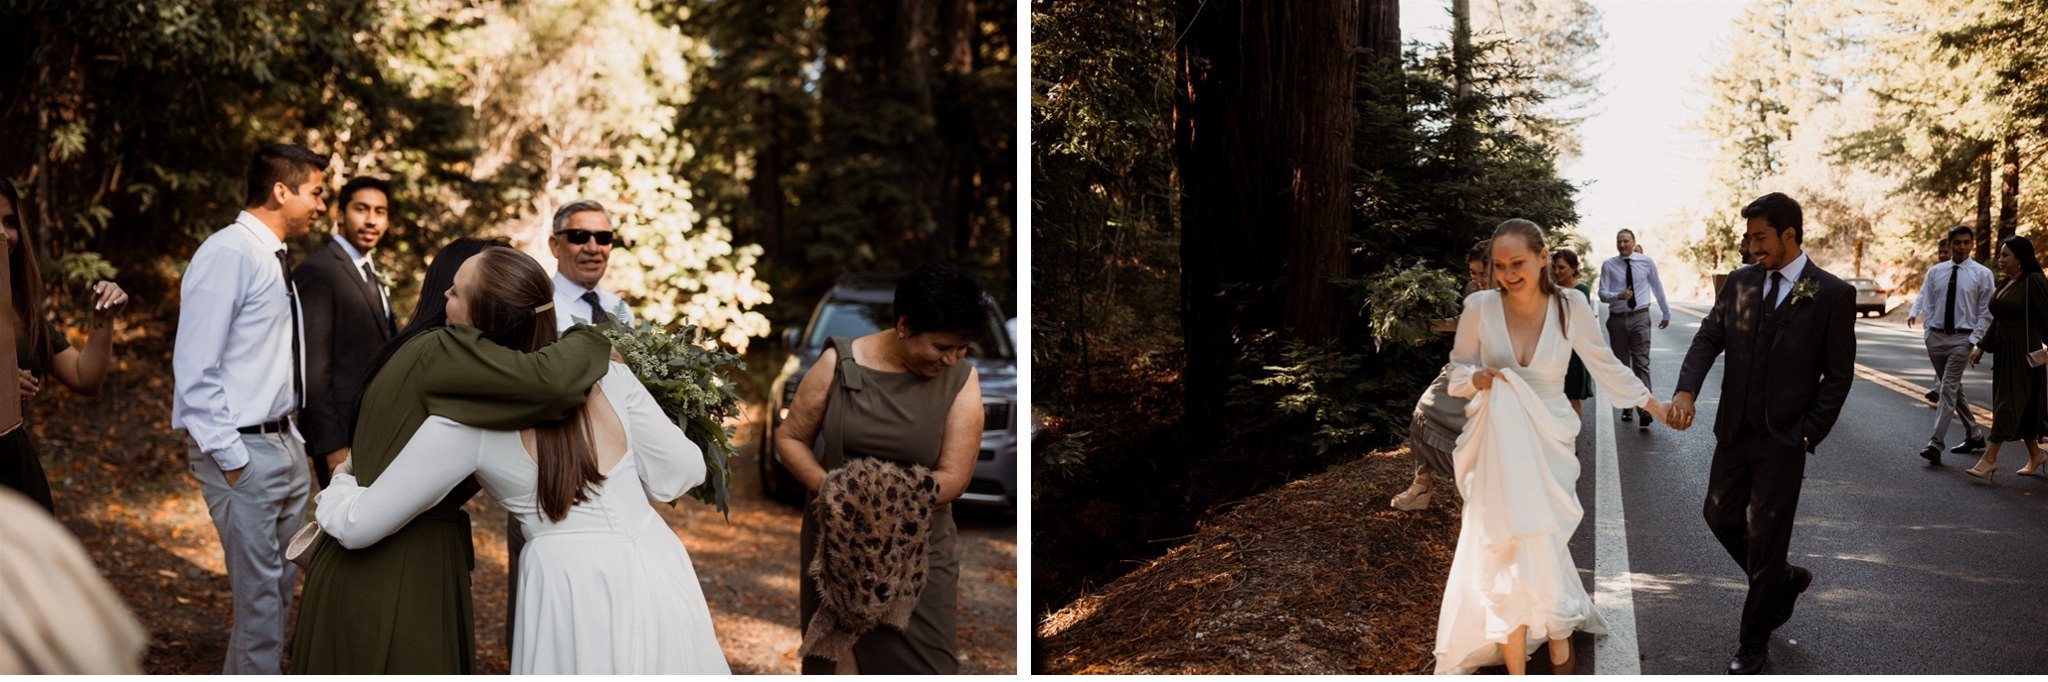 034_Two-Day Big Sur Redwoods Elopement with Family_Will Khoury Elopement Photographer.jpg